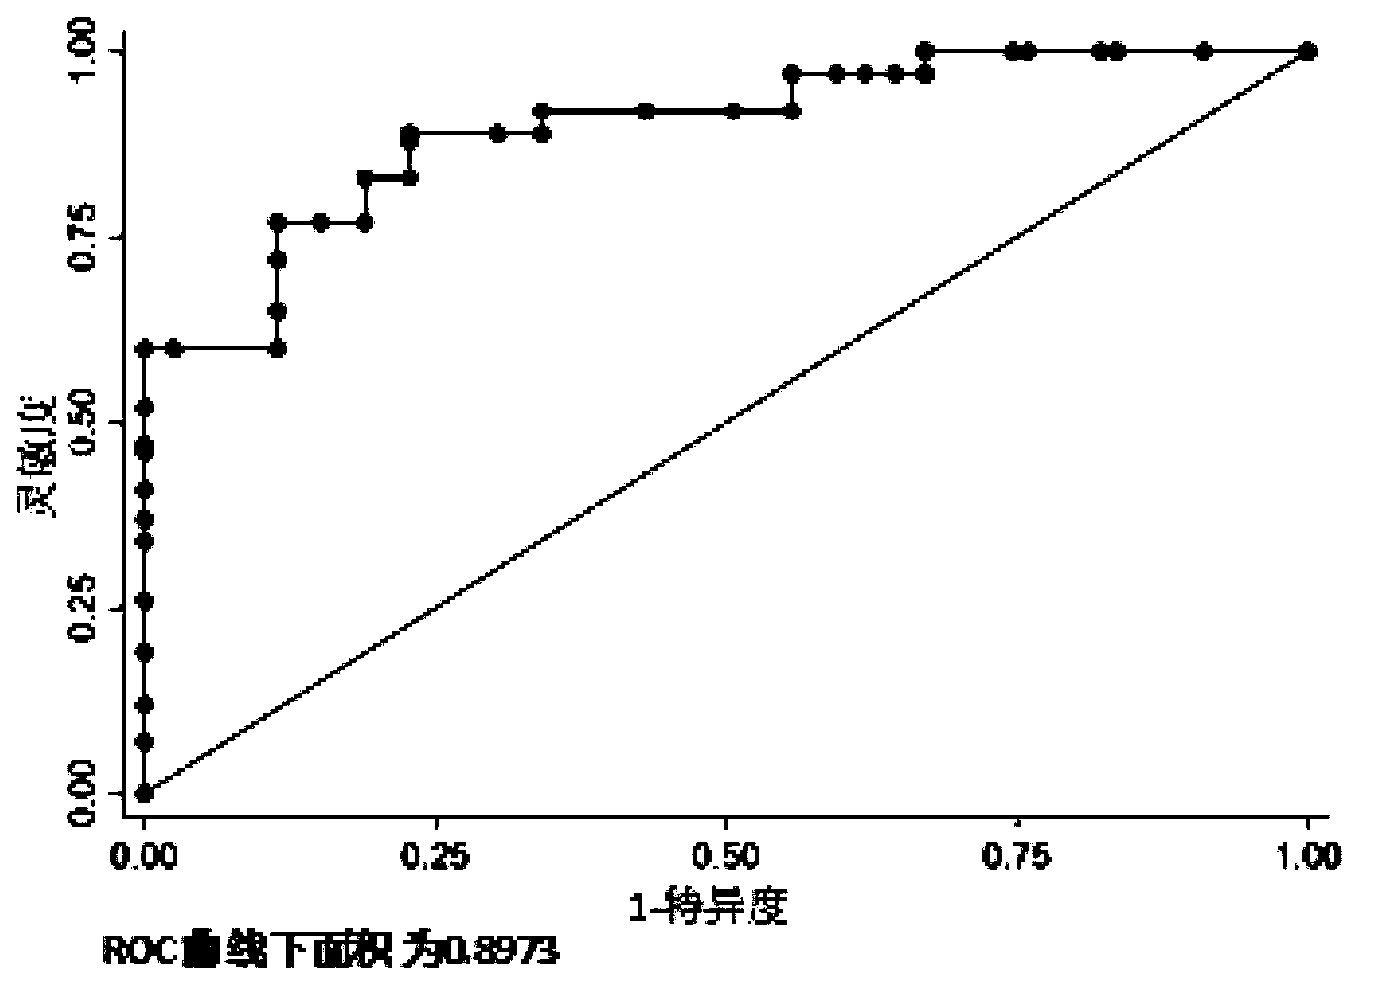 Serum micro ribonucleic acid marker related to human fetal growth restriction and application thereof